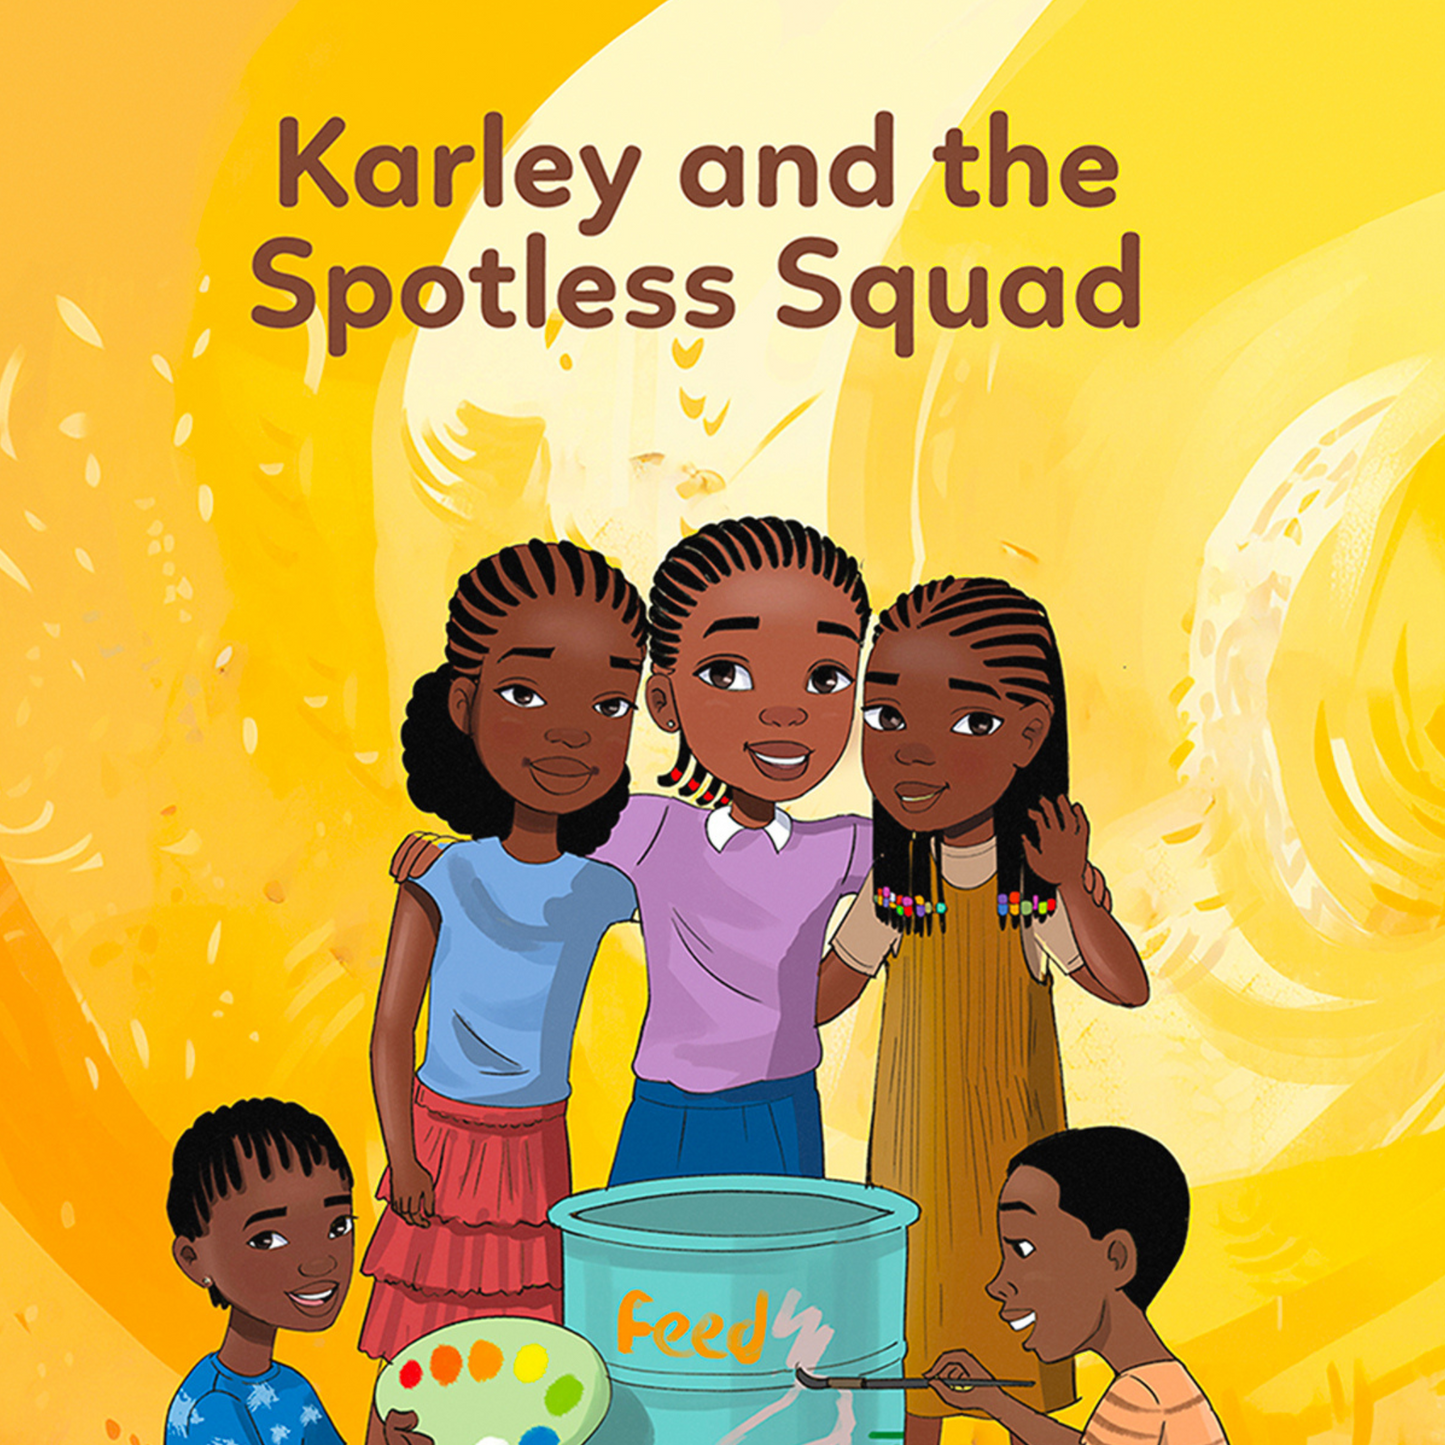 Karley and the Spotless Squad